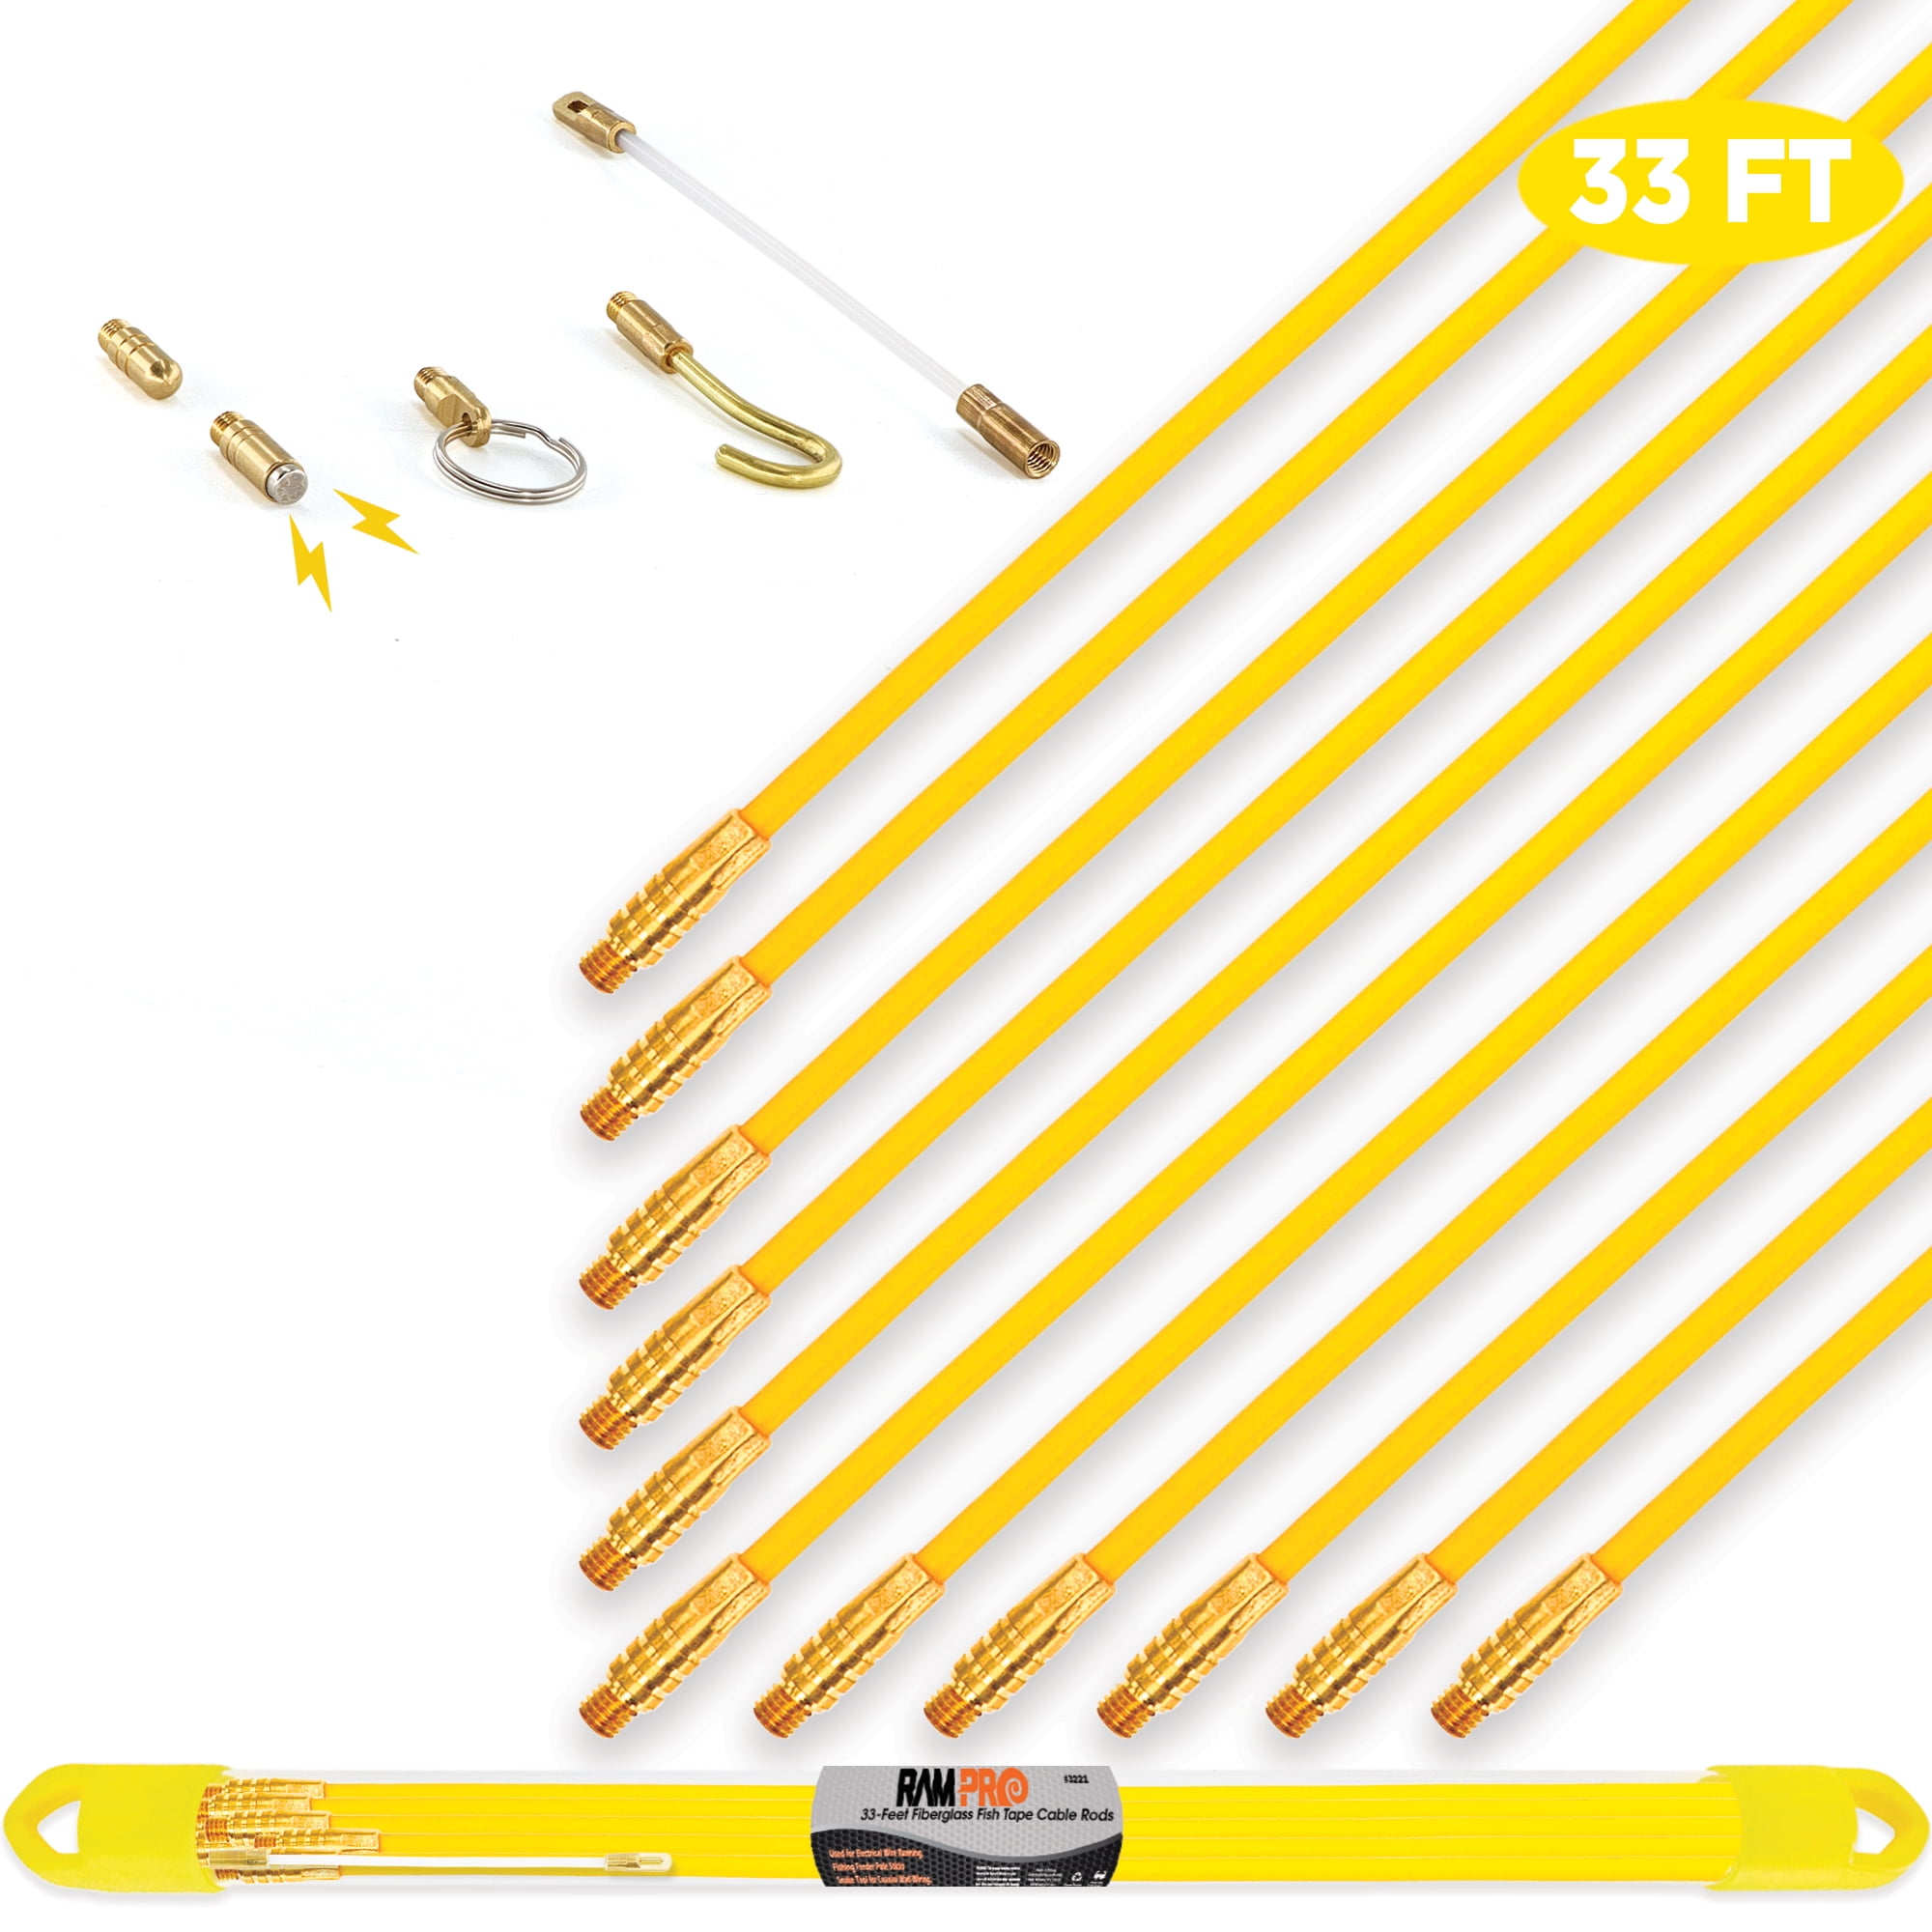 33' Fiberglass Fish Tape Wire Puller - Flexible Wire Puller Electrical Fish  Rod to Fish Wire Through Wall, Pull/Push Pole for Cable Fishing Tools - by  Ram-Pro 